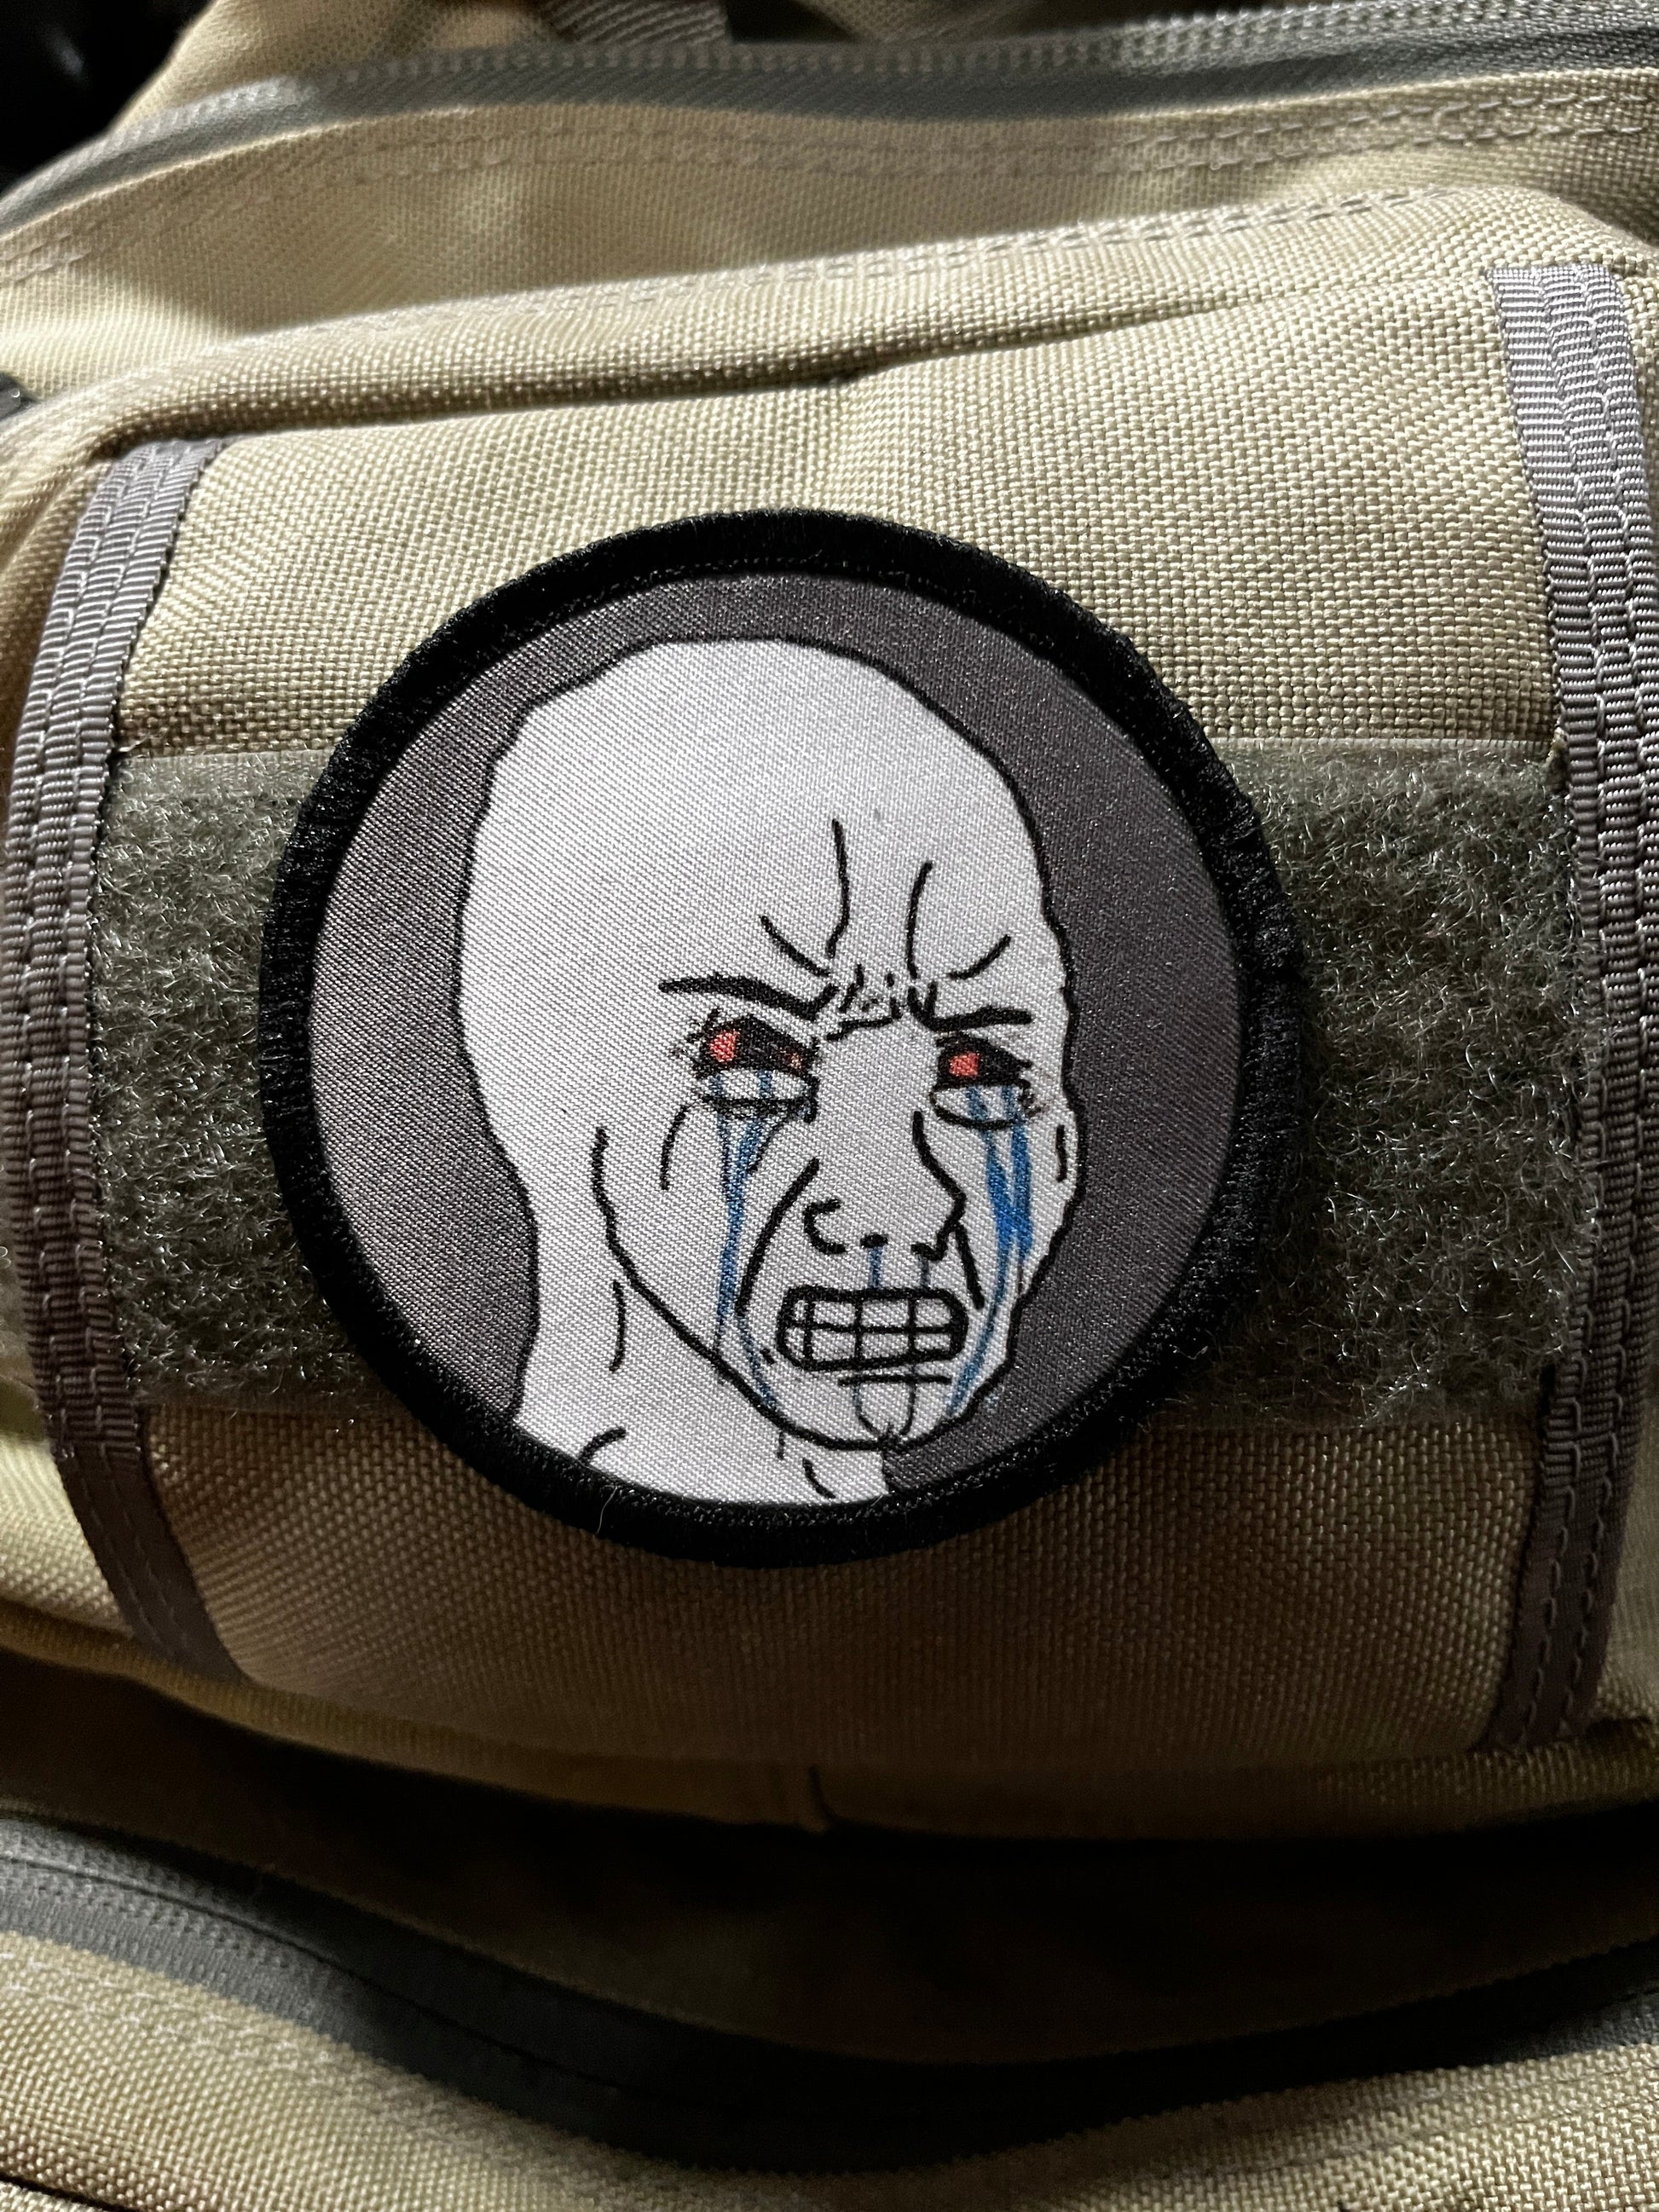 3" Crying Wojak Morale Patch Morale Patches Redheaded T Shirts 